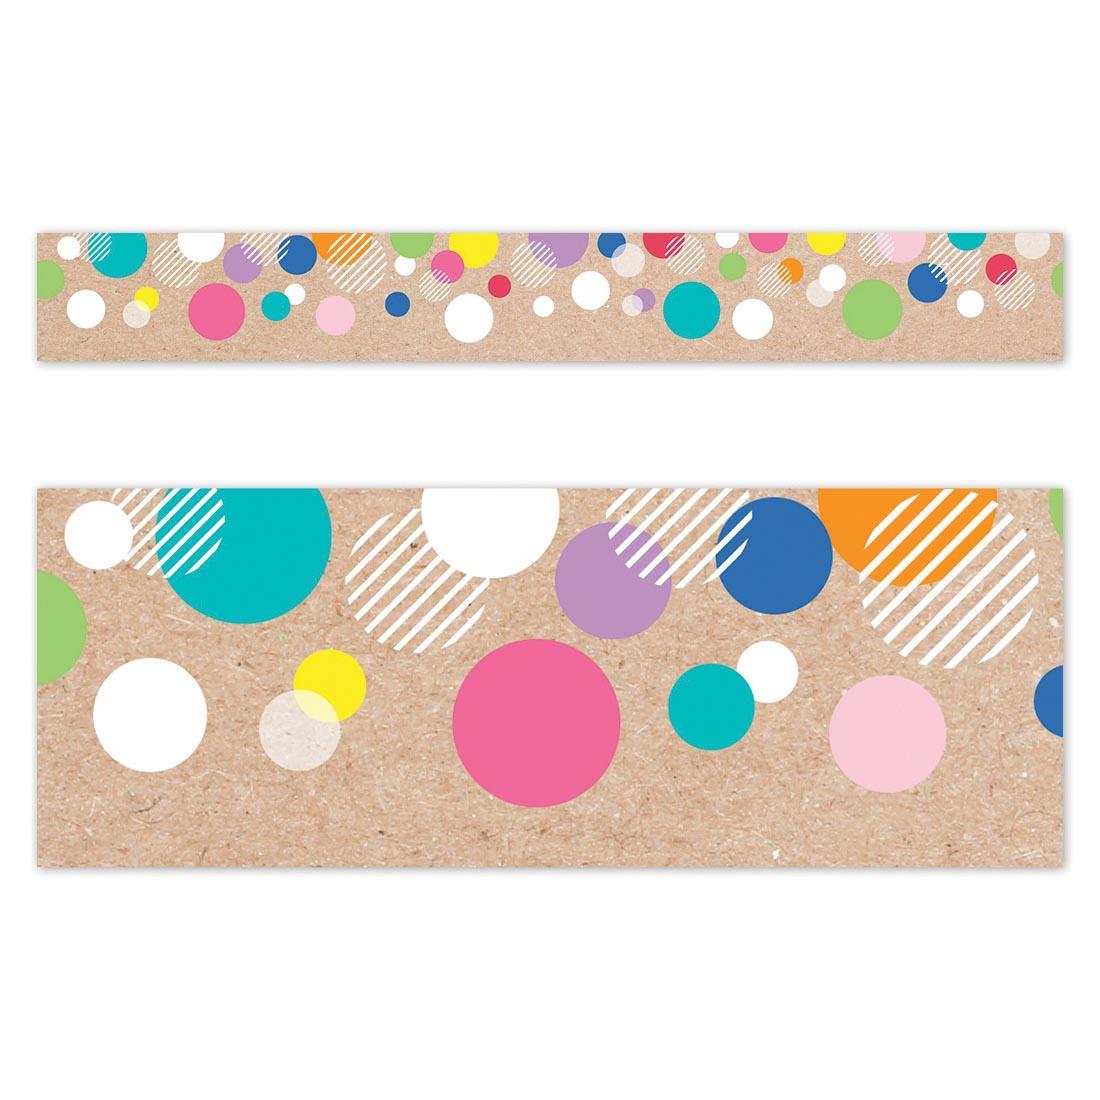 Full strip plus closeup of Colorful Kraft Bubbles EZ Border from the Krafty Pop Collection By Creative Teaching Press